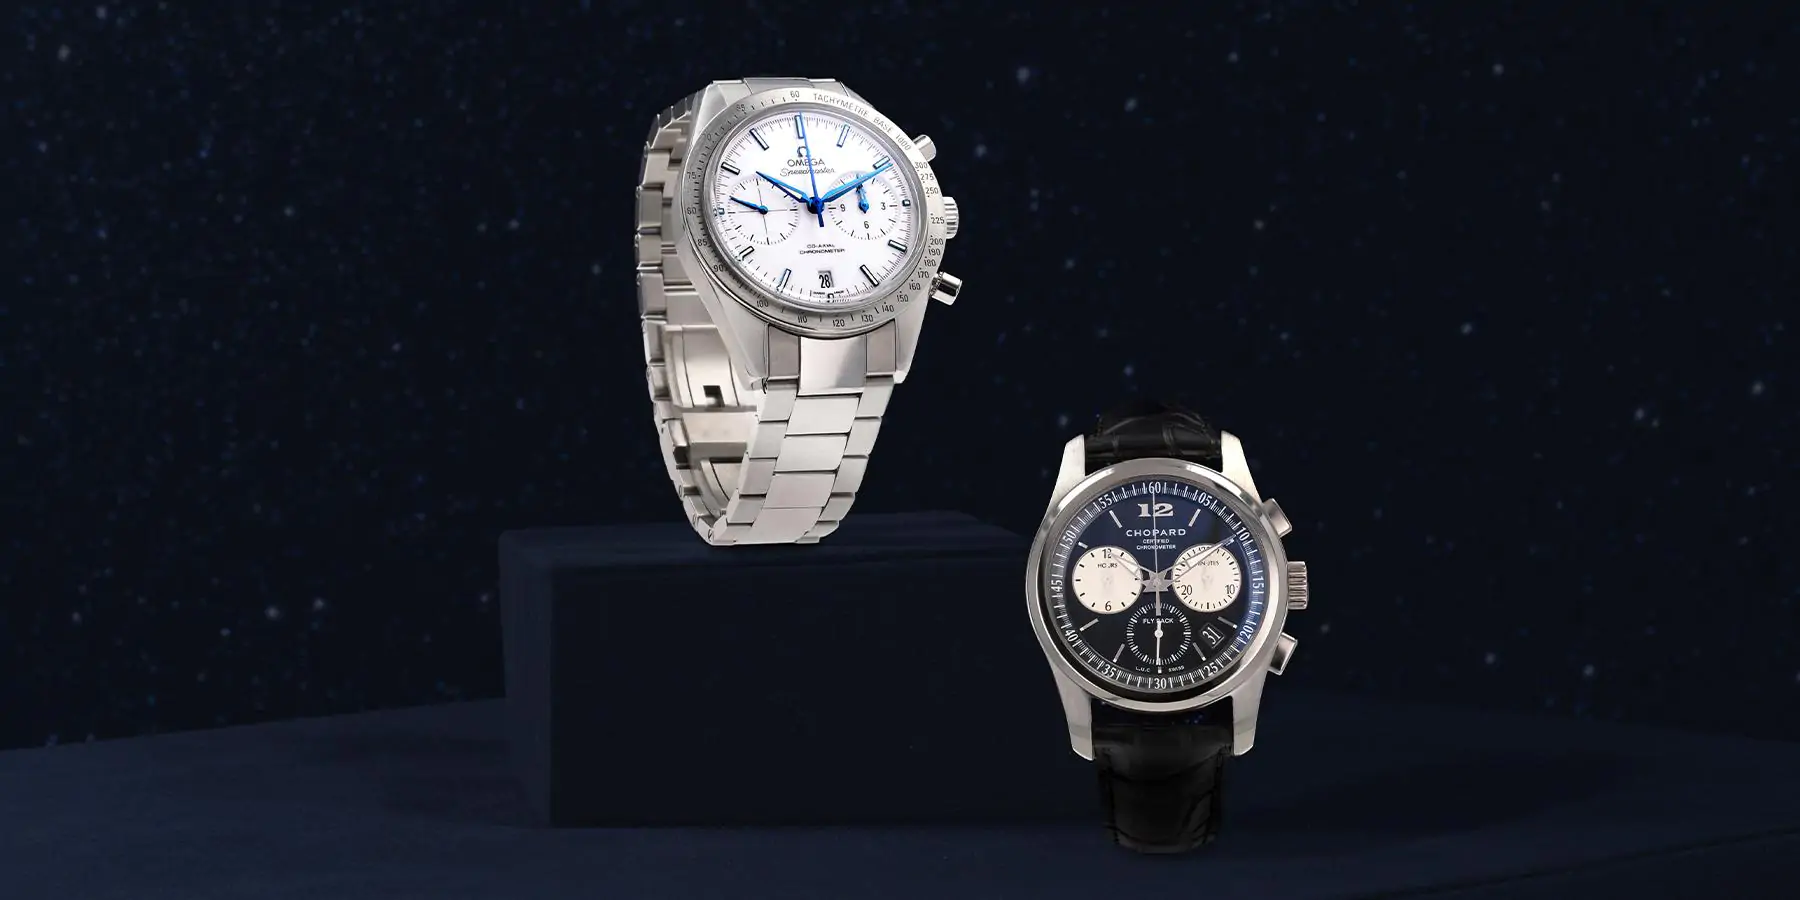 Watch Gifts for Him